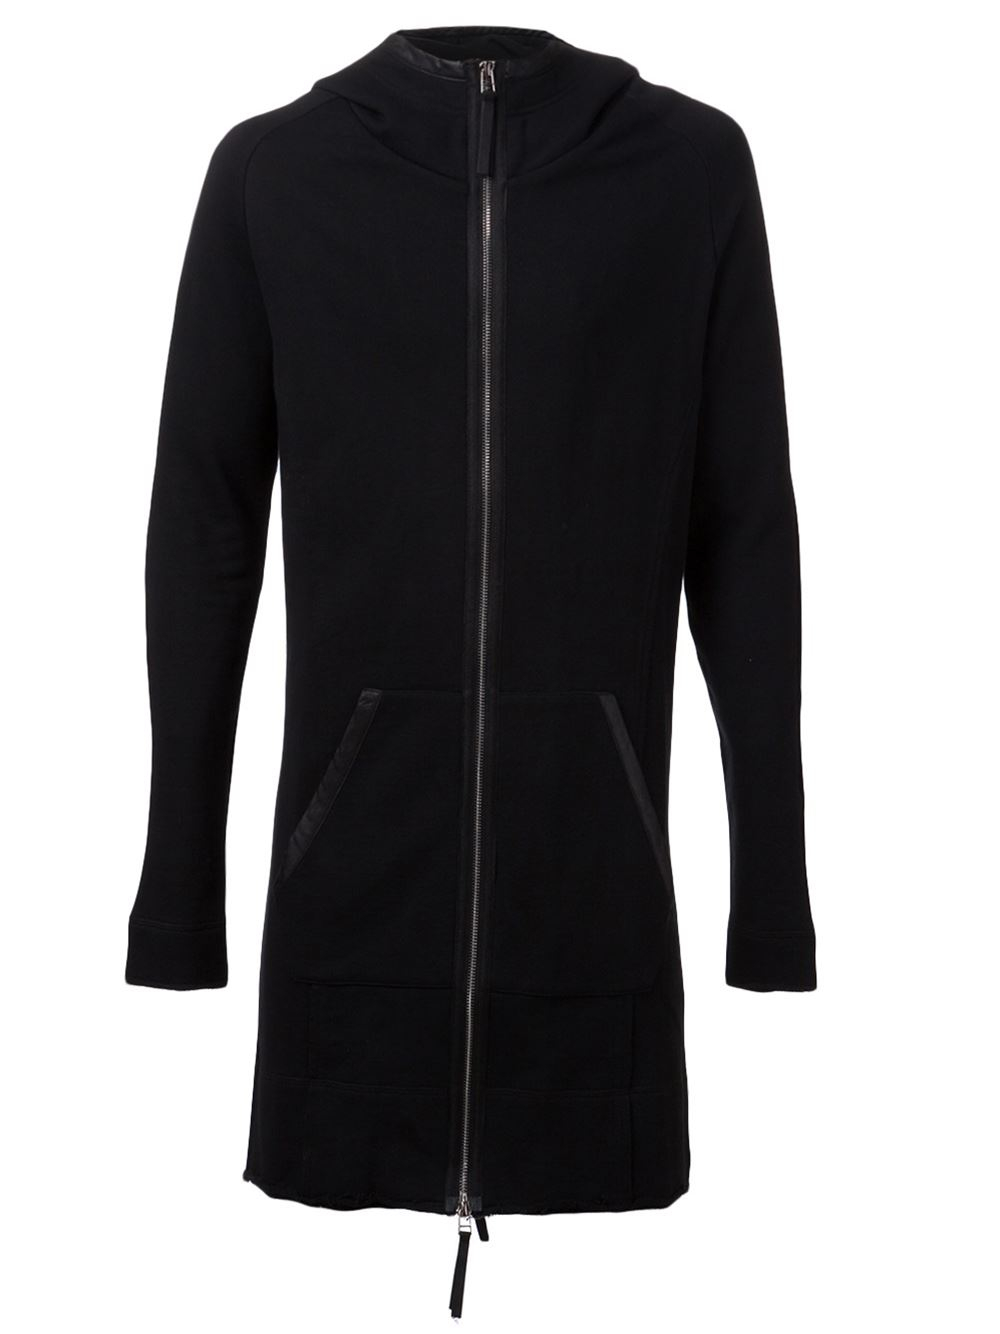 Lyst - Unconditional Long Hoodie in Black for Men